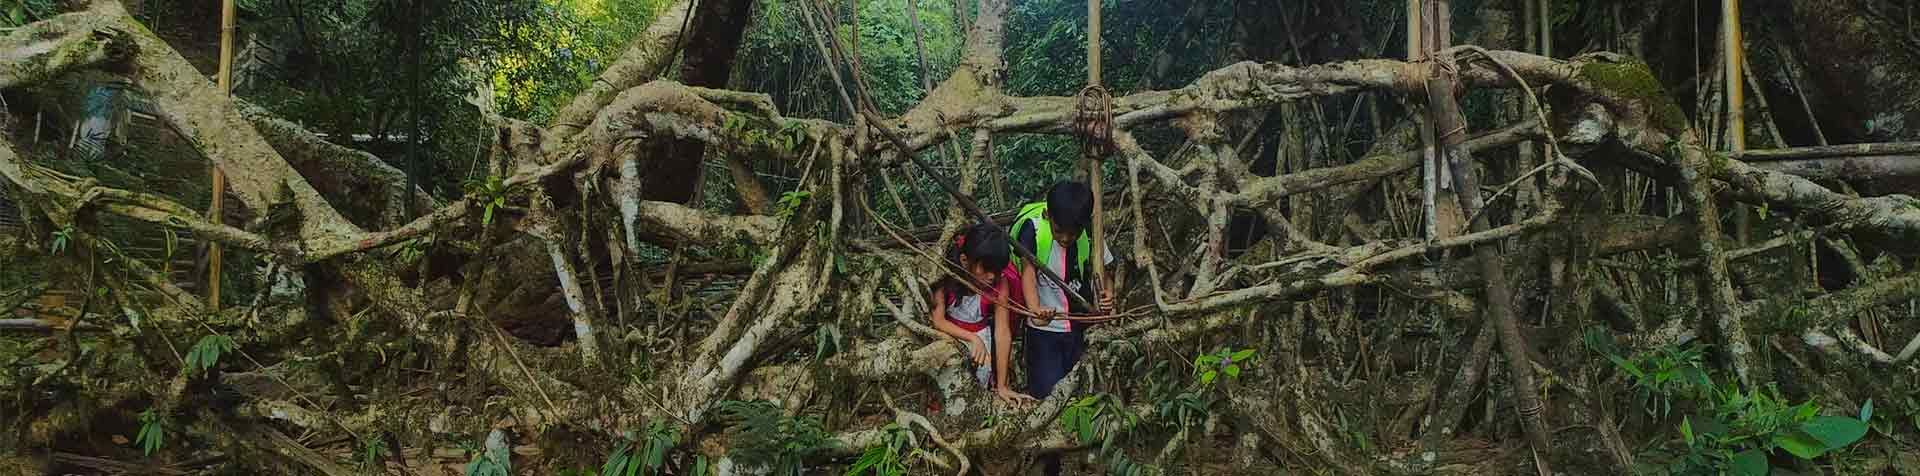 Two children are walking through the rainforest, looking at the branches.